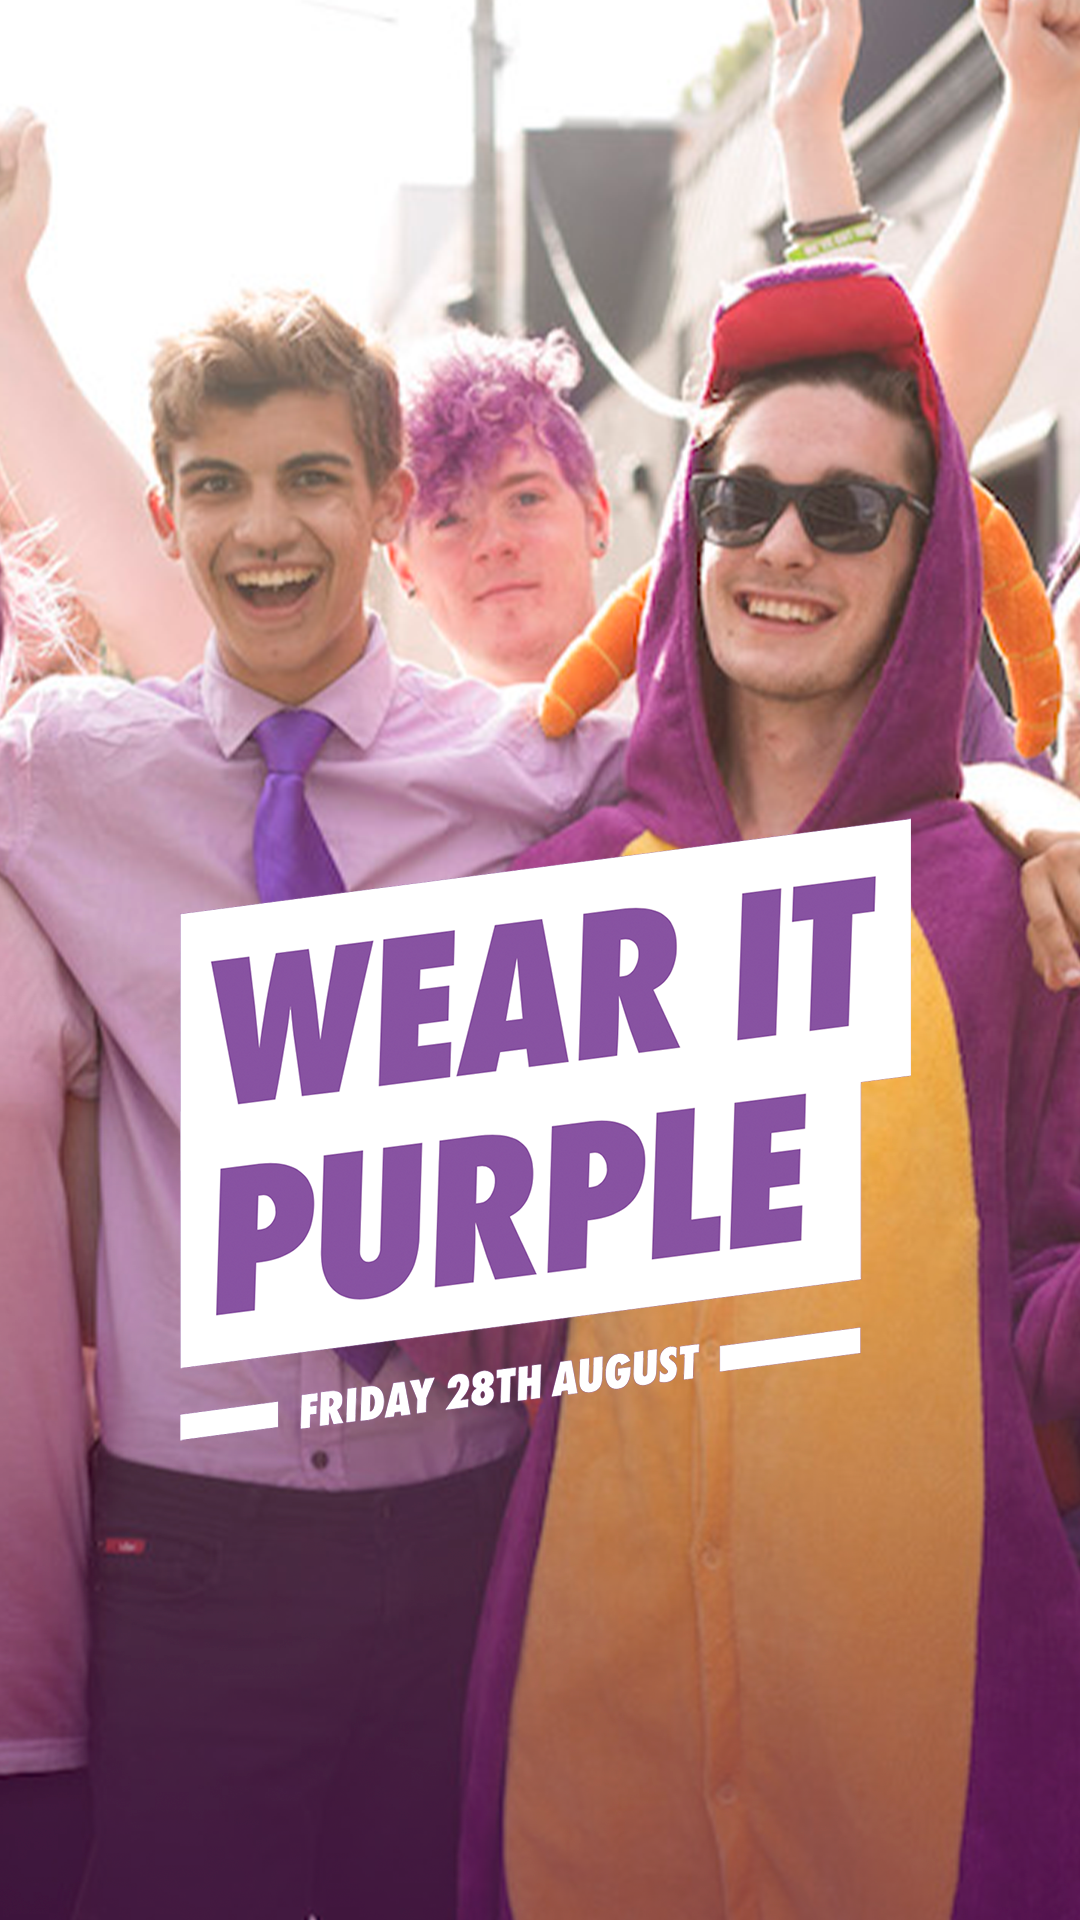 Get involved in wear it purple day